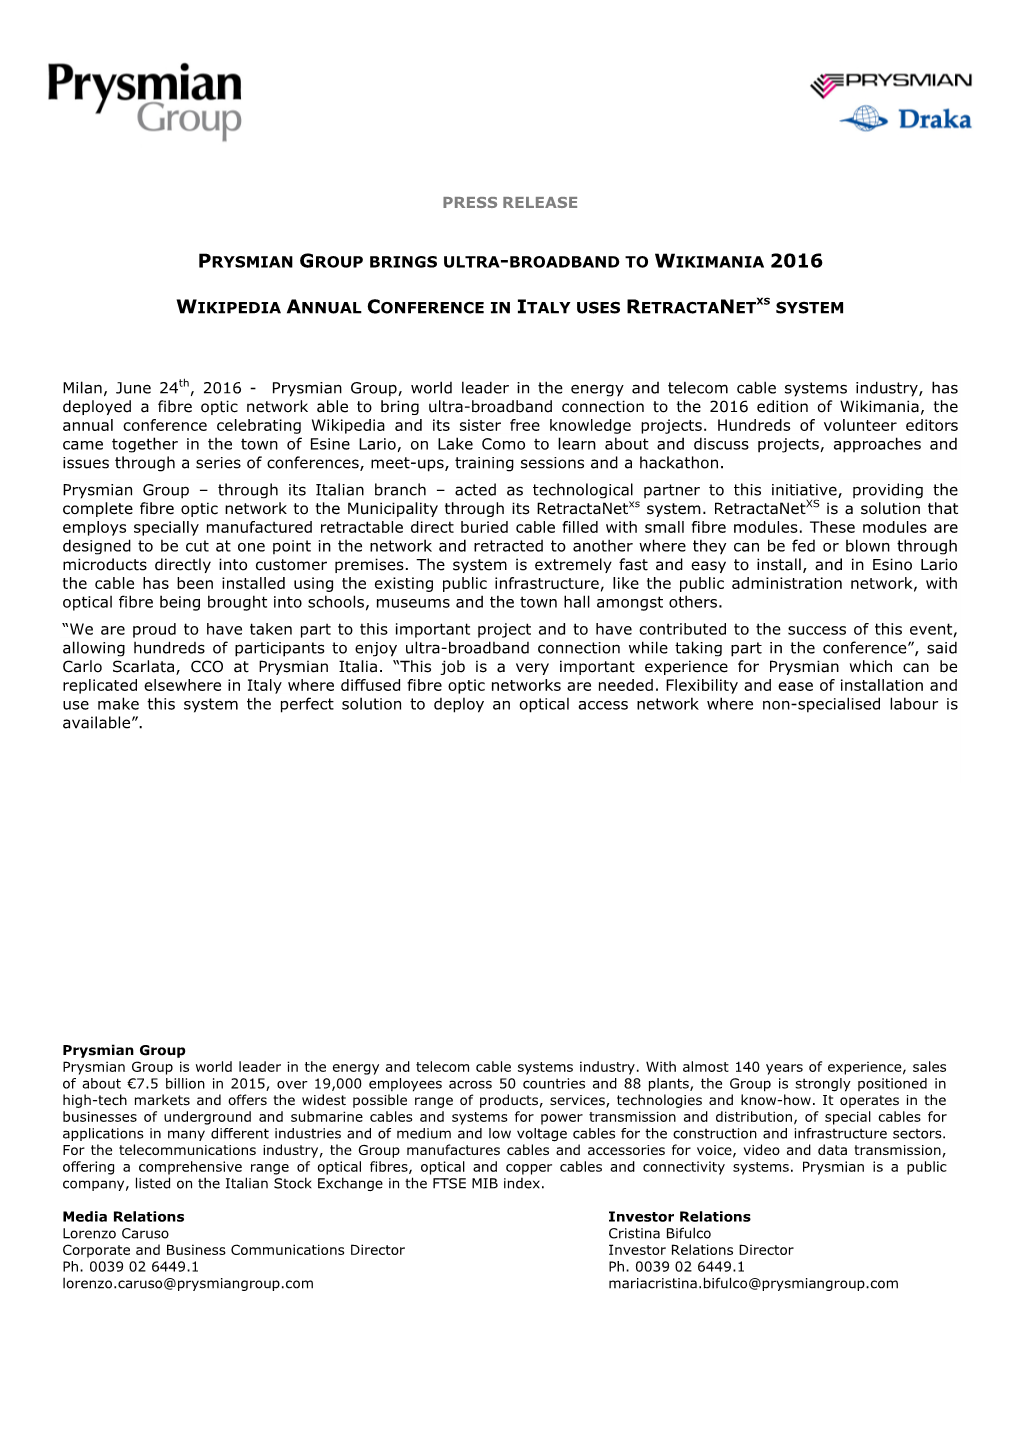 Press Release Prysmian Group Brings Ultra-Broadband to Wikimania 2016 Wikipedia Annual Conference in Italy Uses Retractanetxs Sy